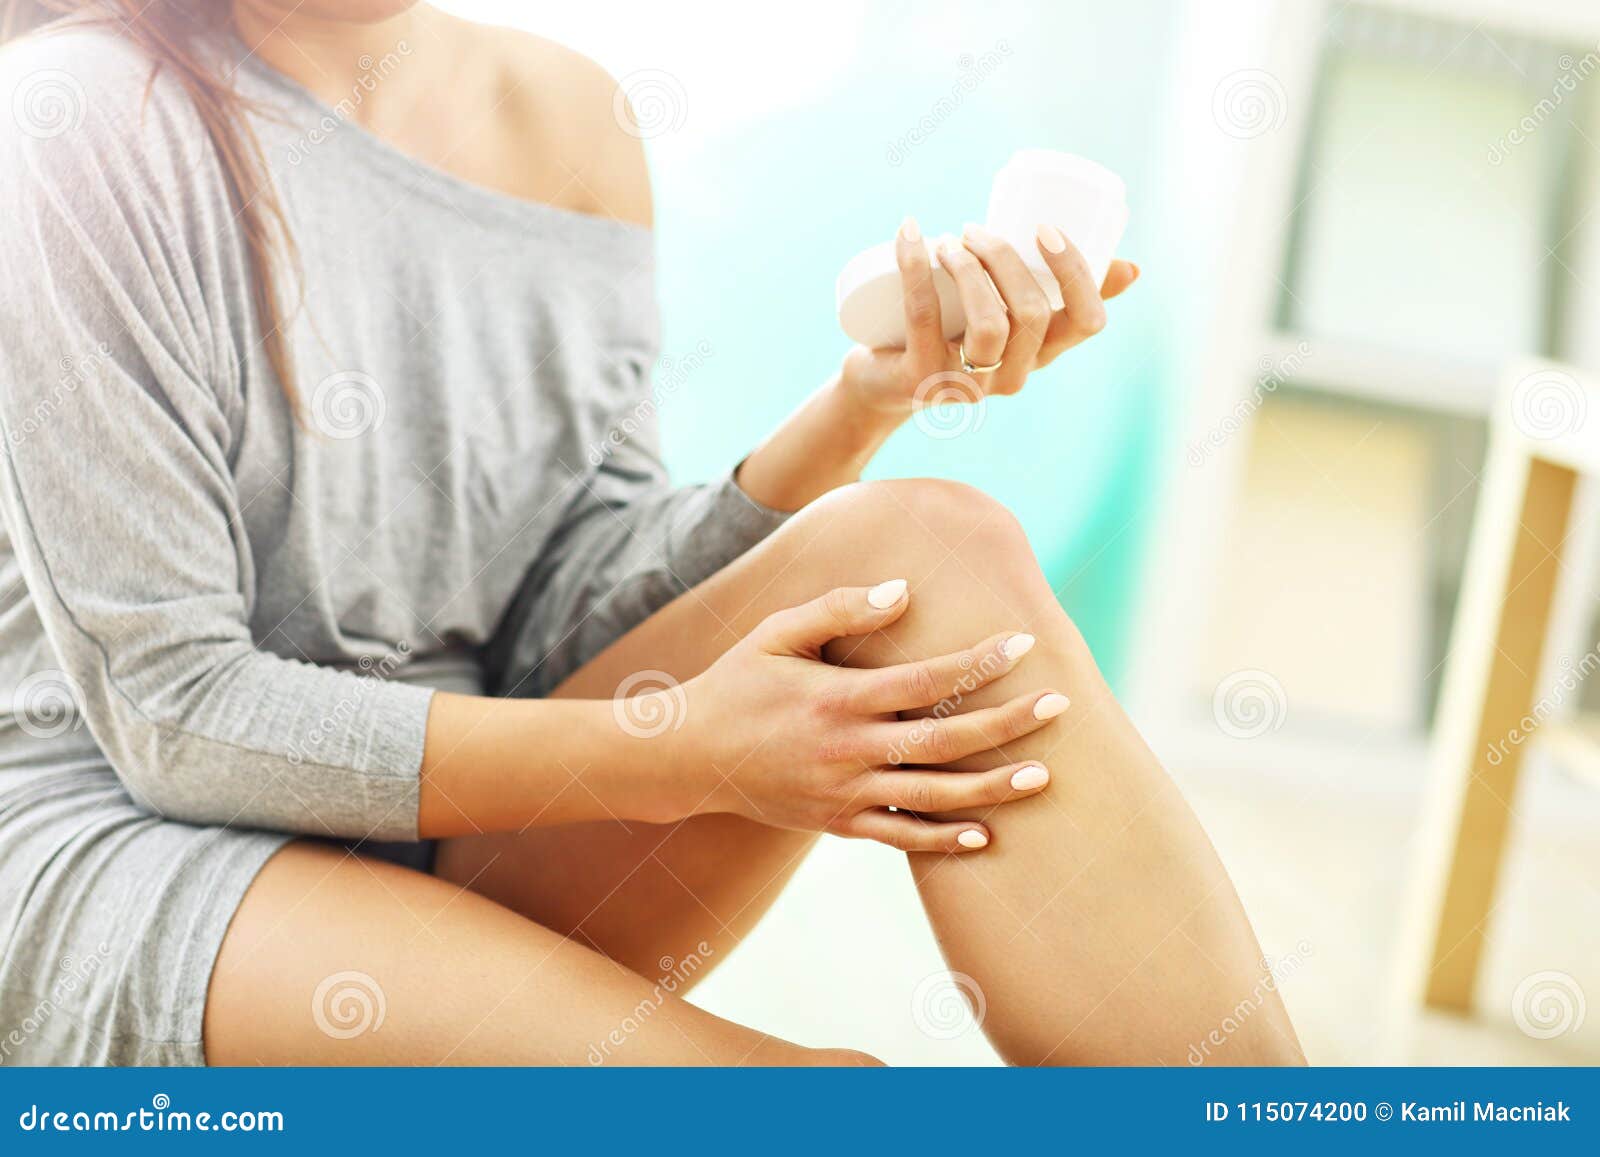 woman using body lotion on her legs